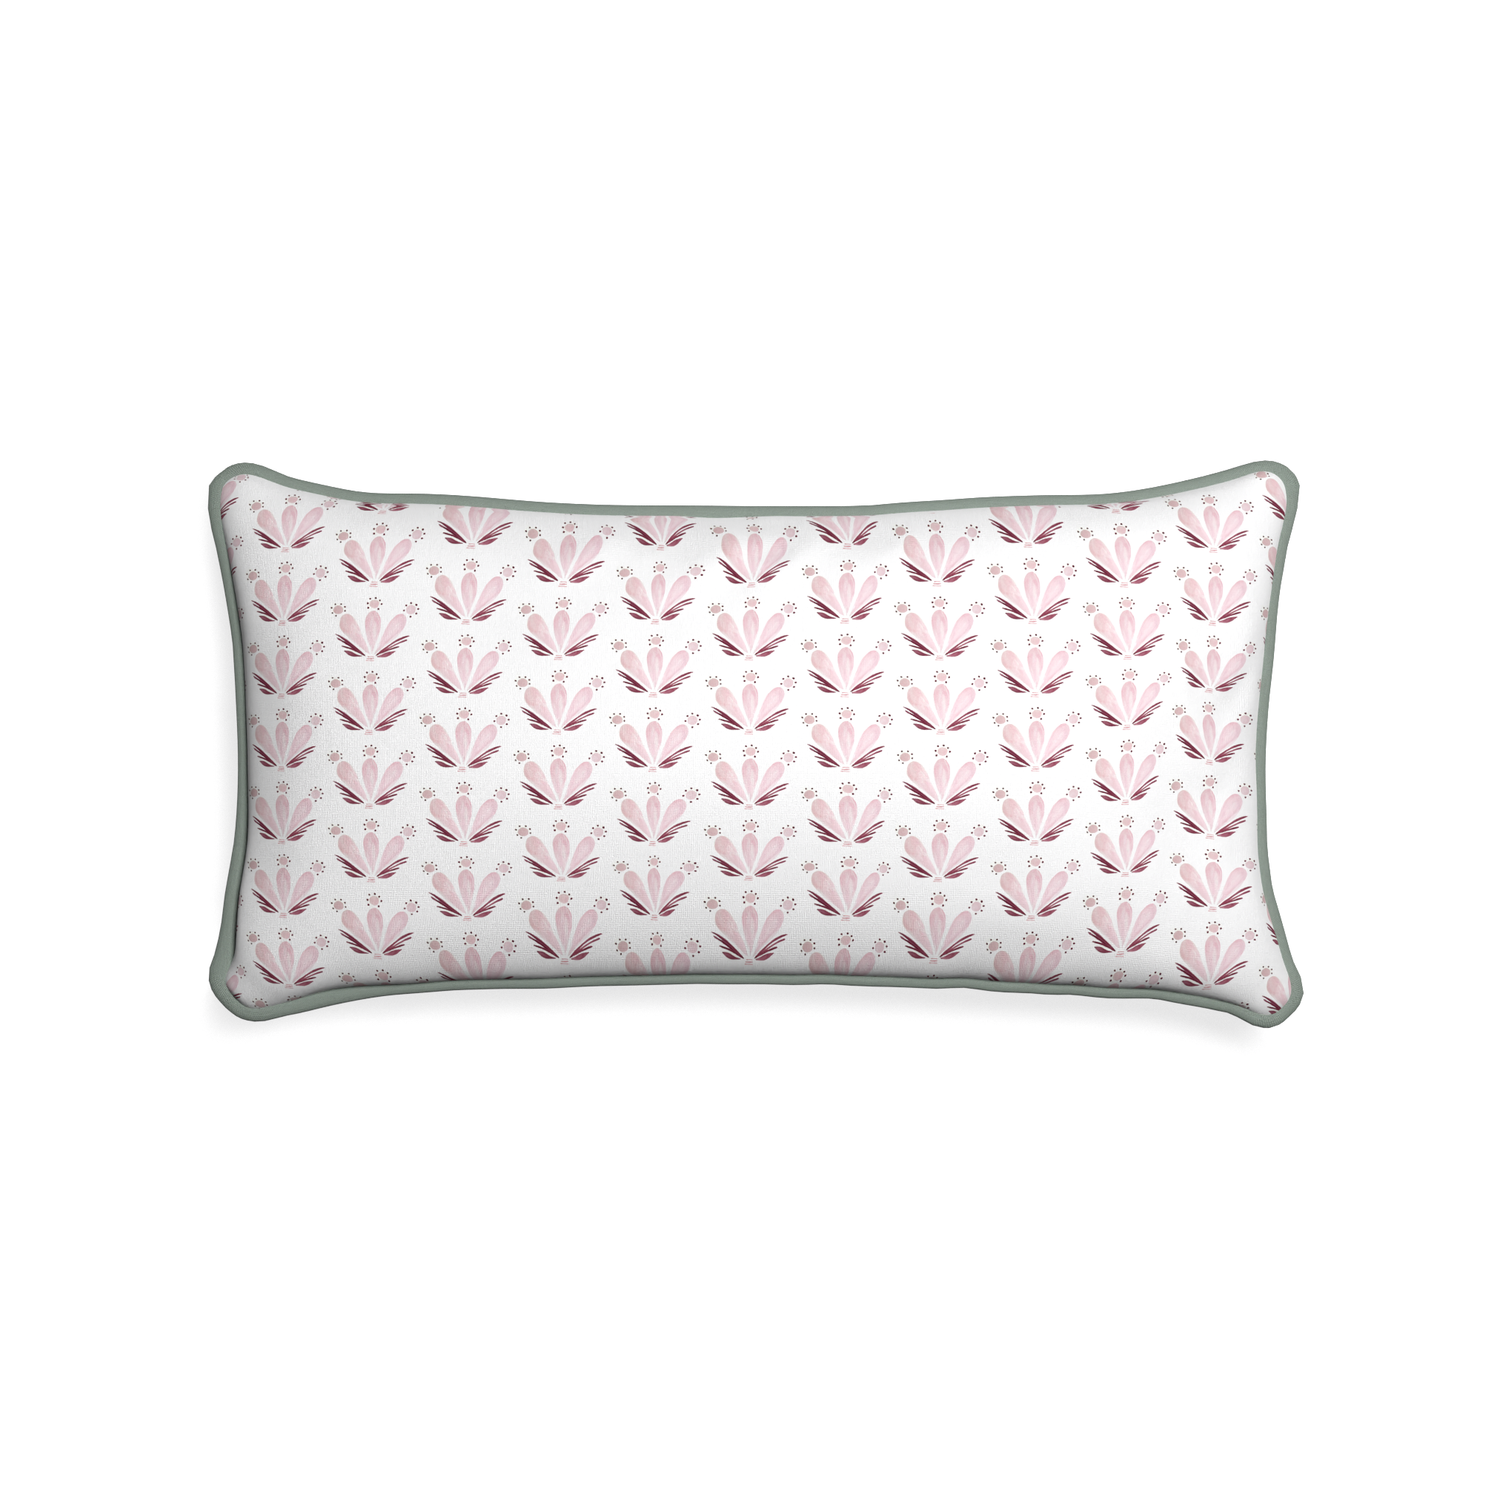 Midi-lumbar serena pink custom pink & burgundy drop repeat floralpillow with sage piping on white background